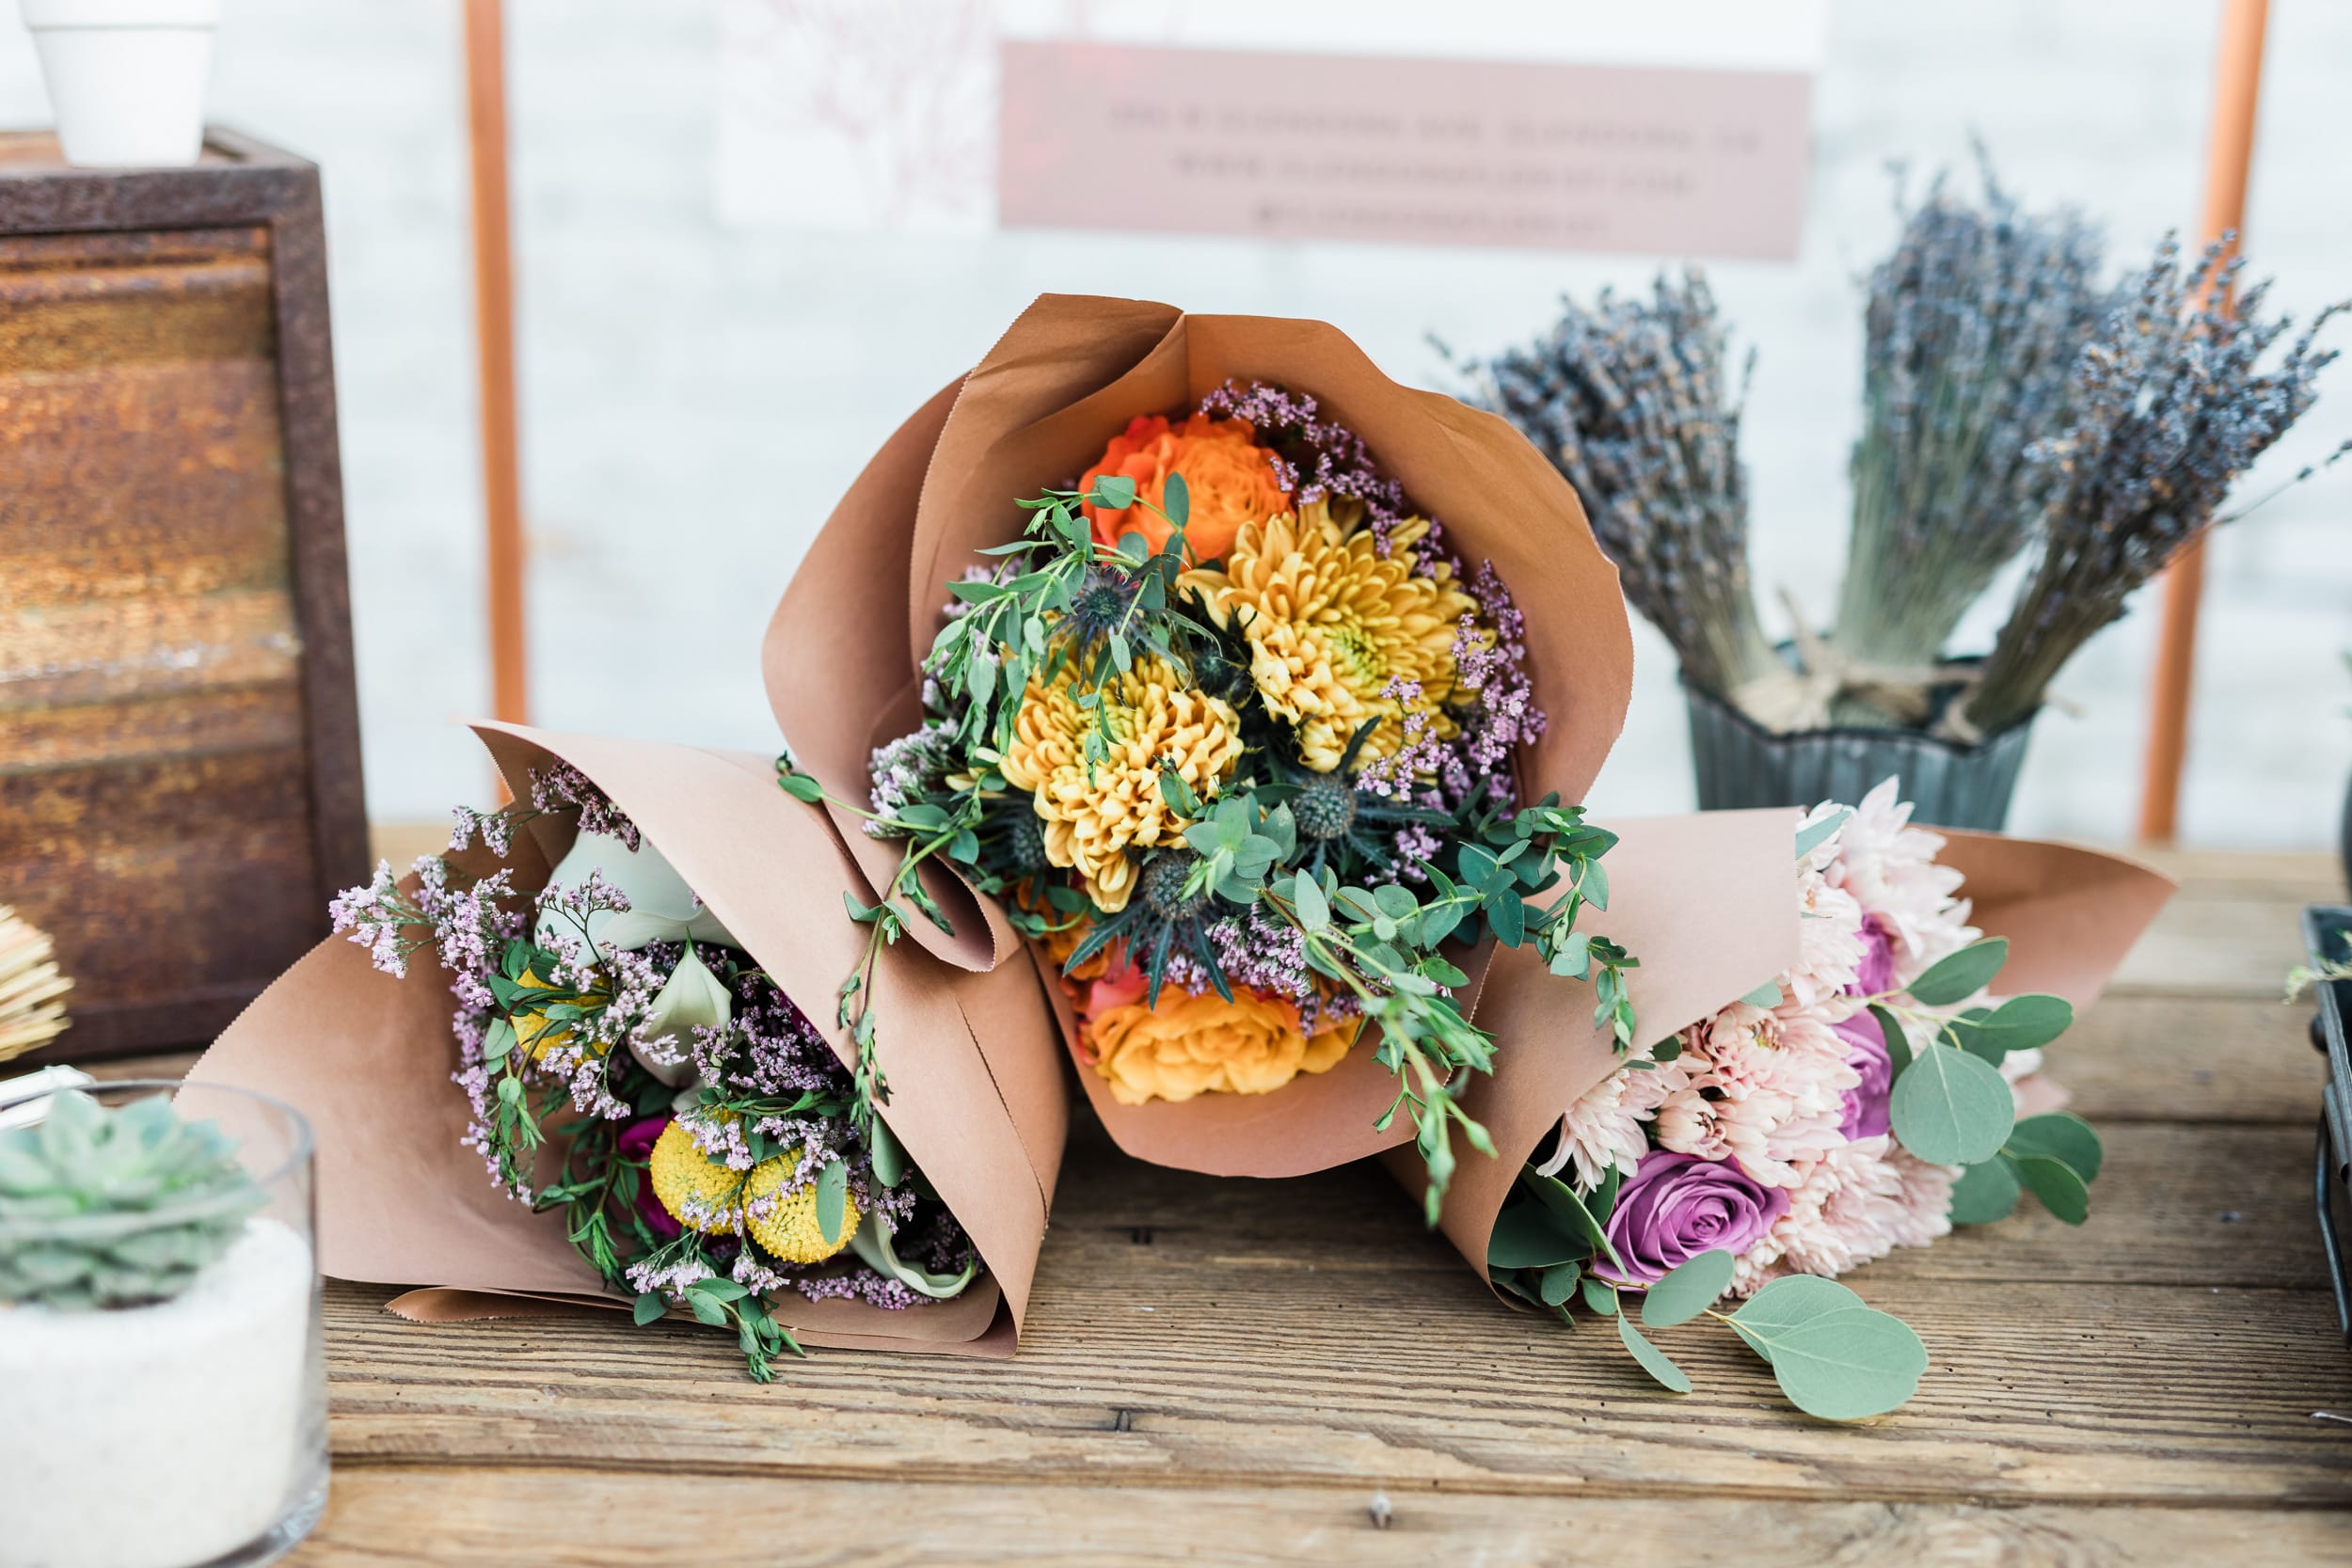 Seasonal Mixed Wrap - Mix of seasonal florals. Standard includes about 6-8 stems accentuated with foliage and textures. 